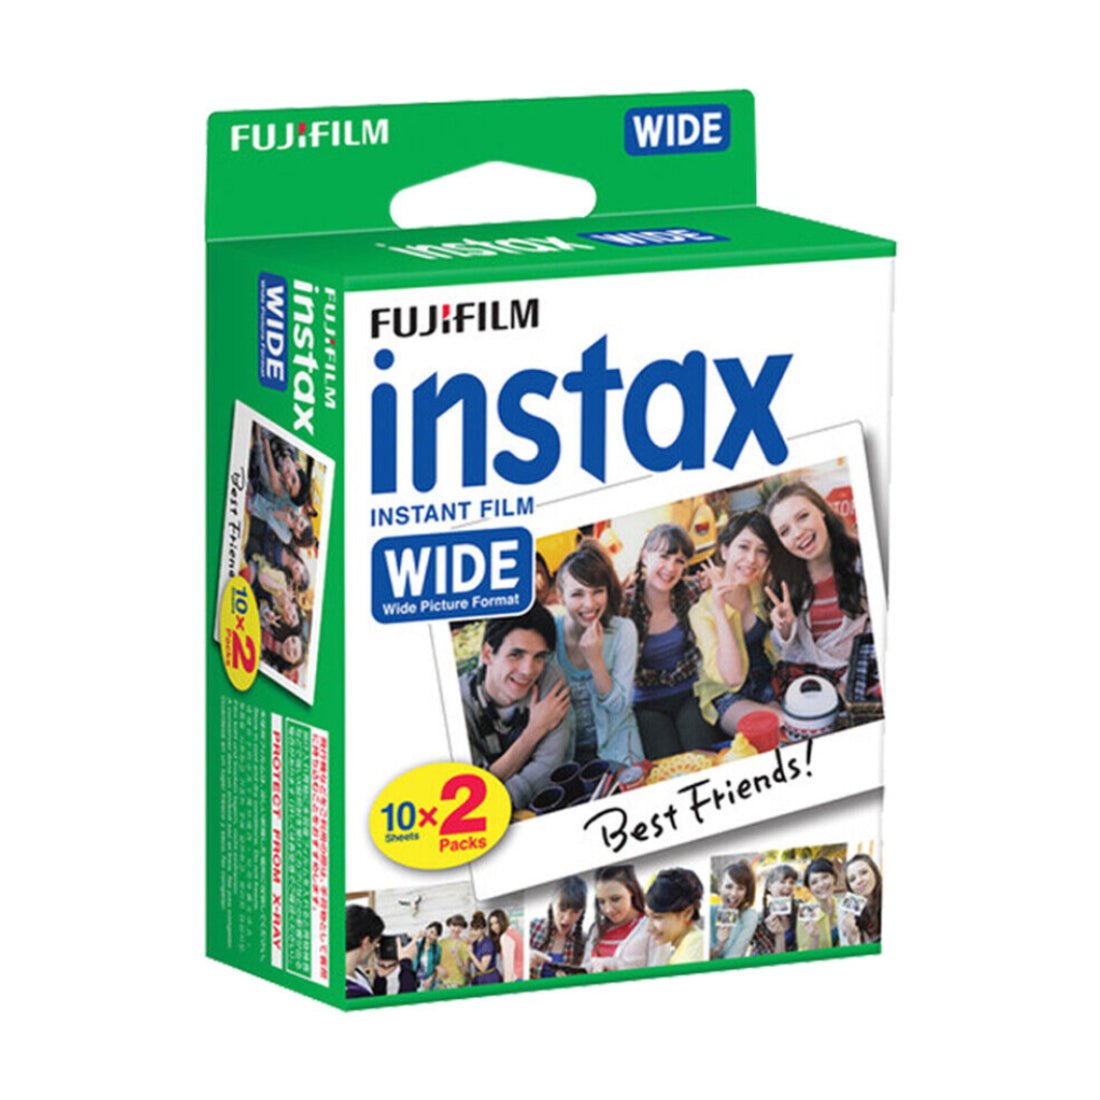 Fujifilm Instax Wide Film 2 Packs of 10 Sheets - أوراق طباعة - Store 974 | ستور ٩٧٤